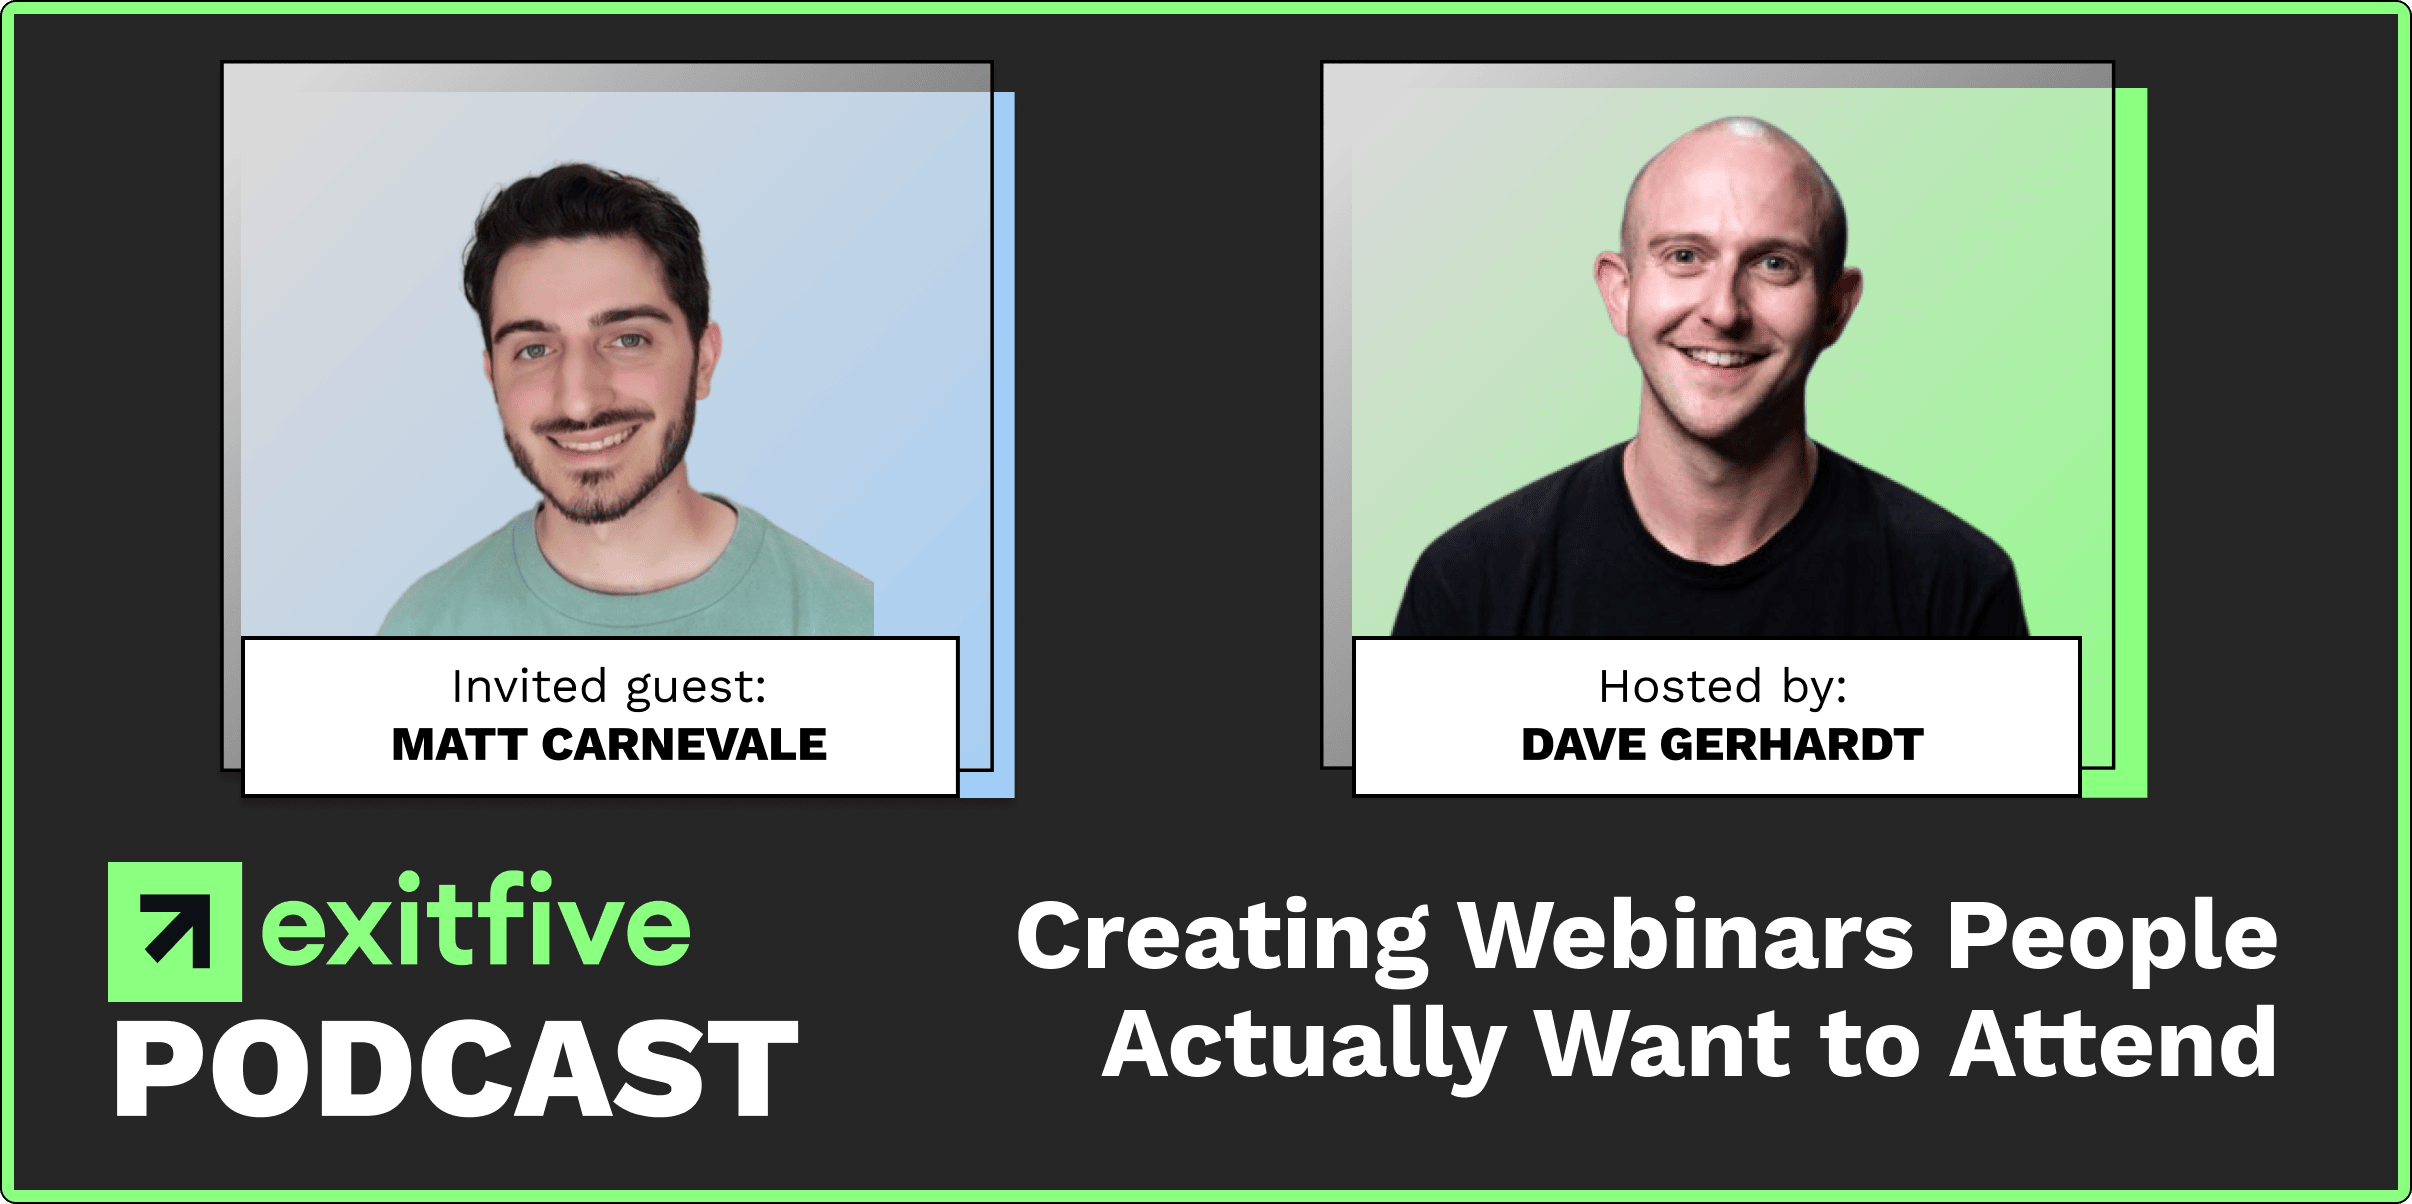 Inside Exit Five | Creating Webinars People Actually Want to Attend (Behind the Playbook We’re Building)